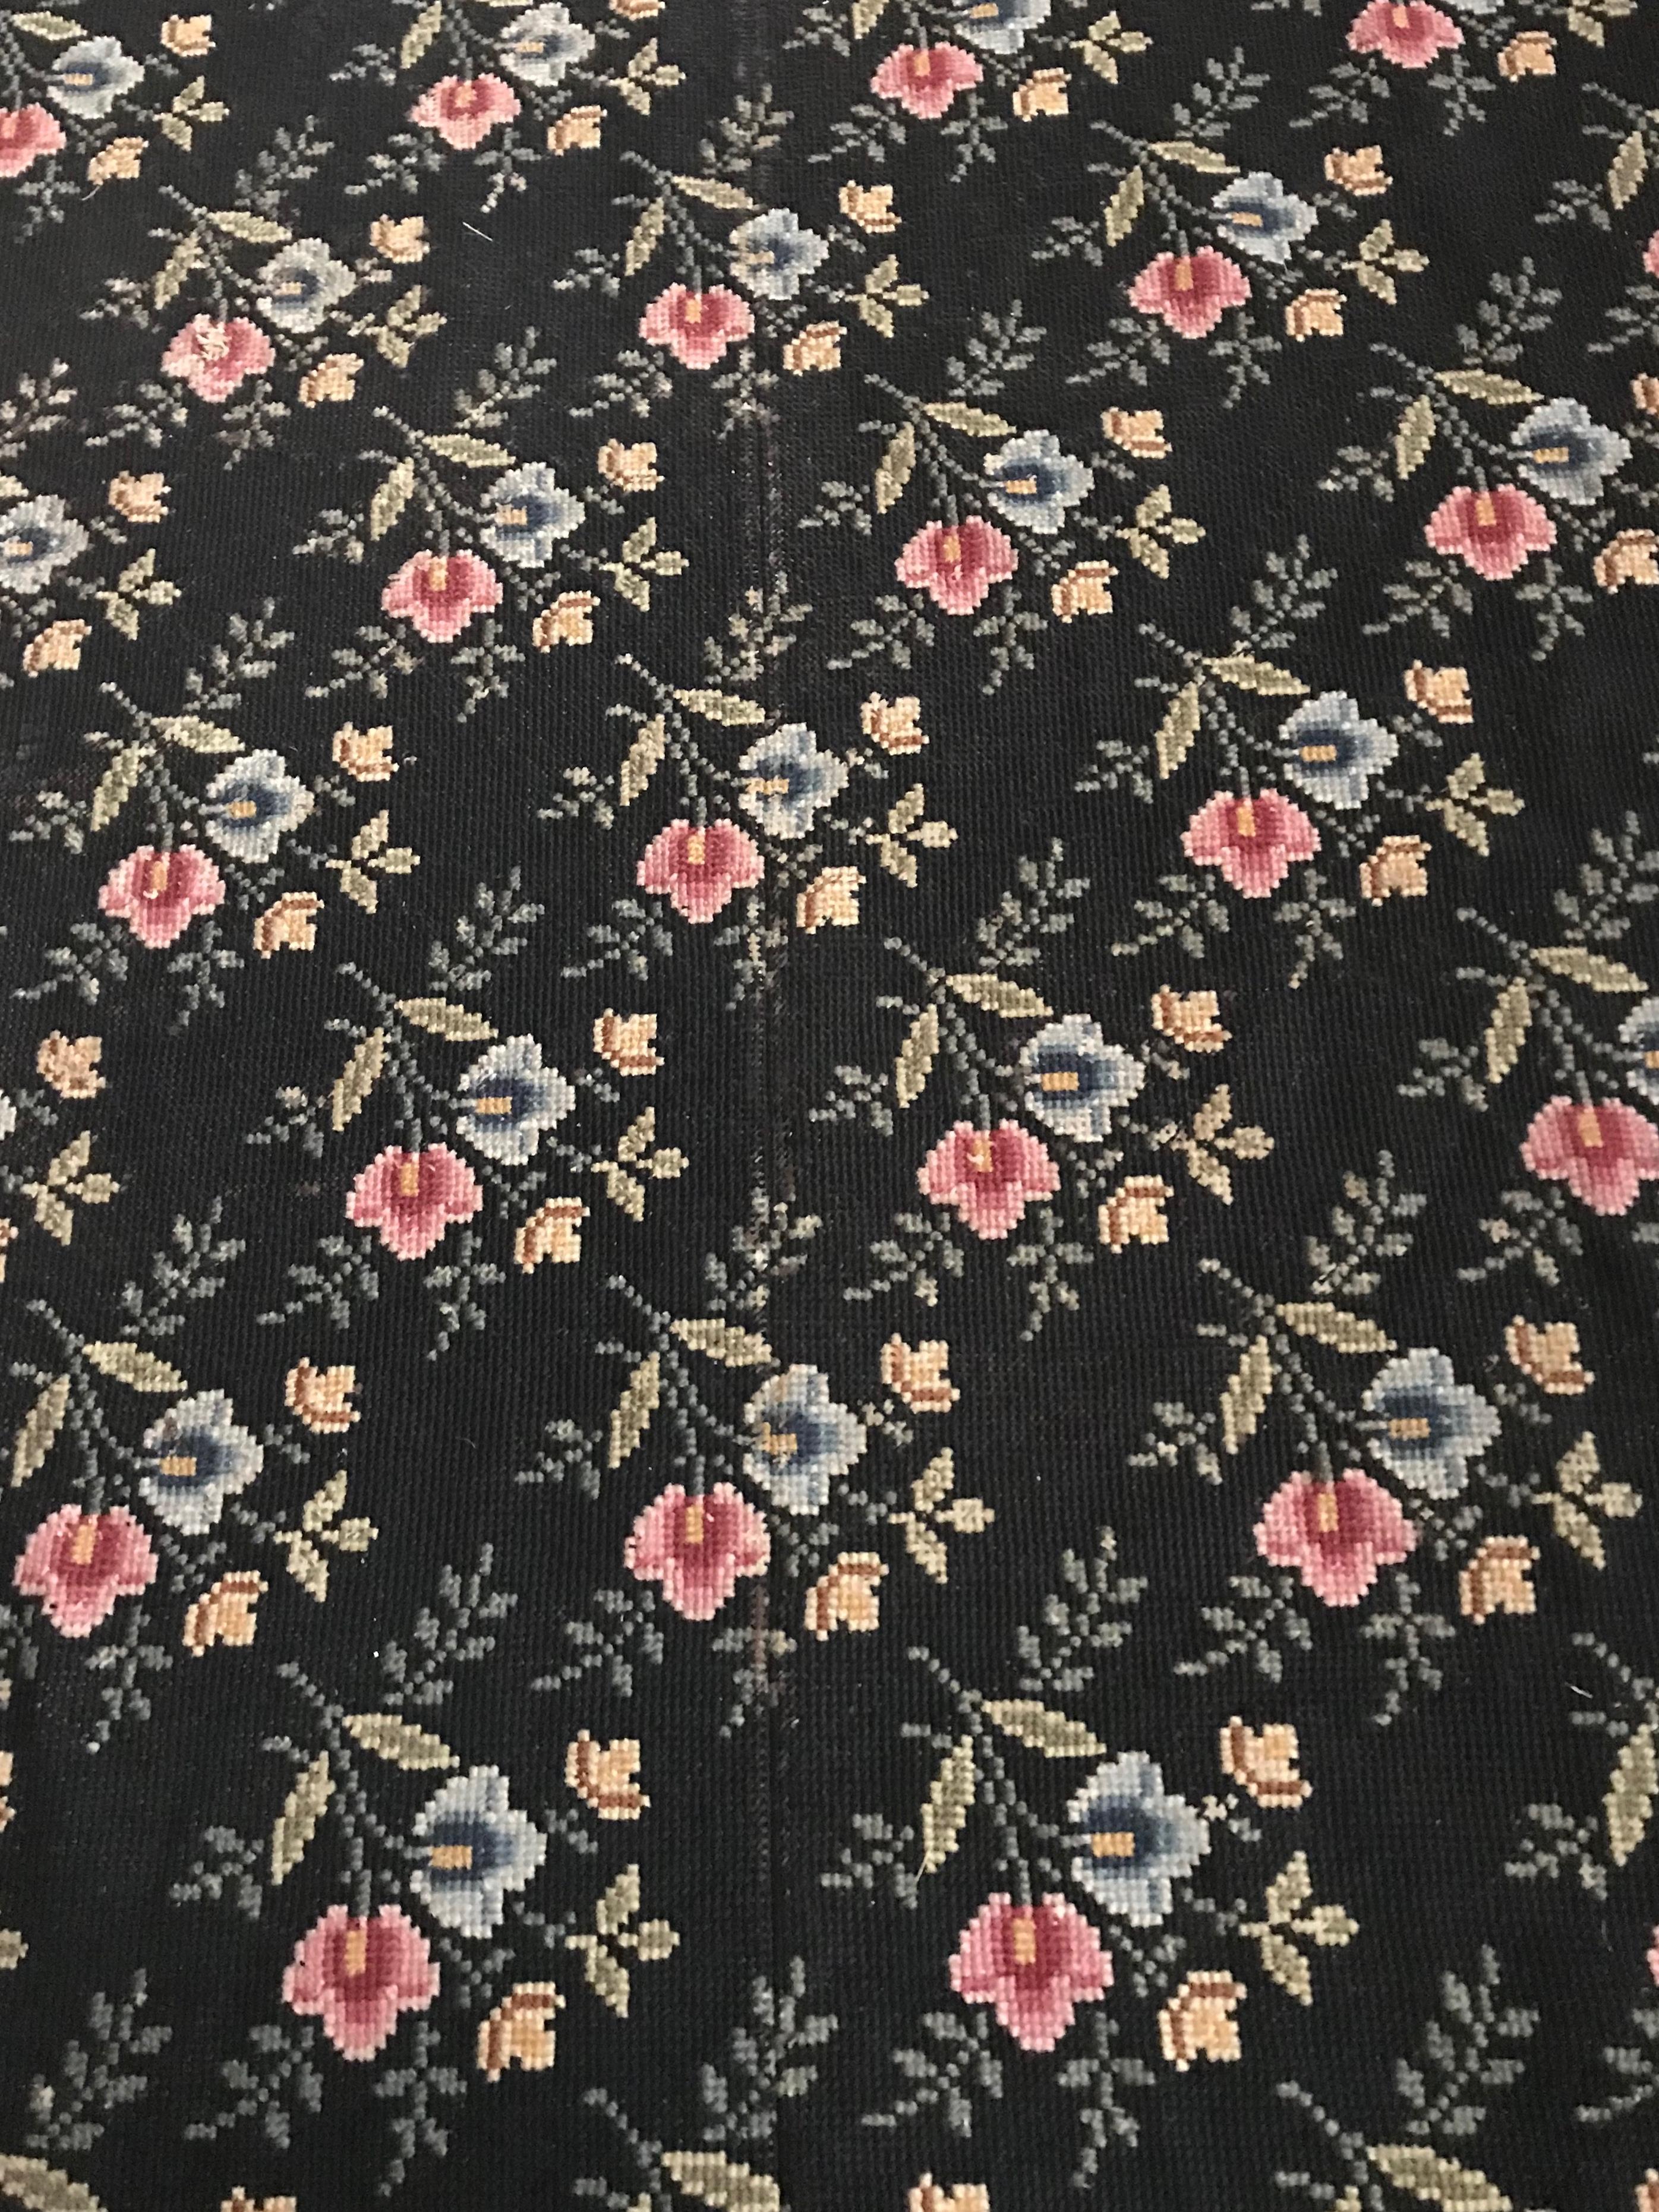 Huge Antique Black French Cross Stitch Wool Carpet Madeleine Castaing For Sale 1